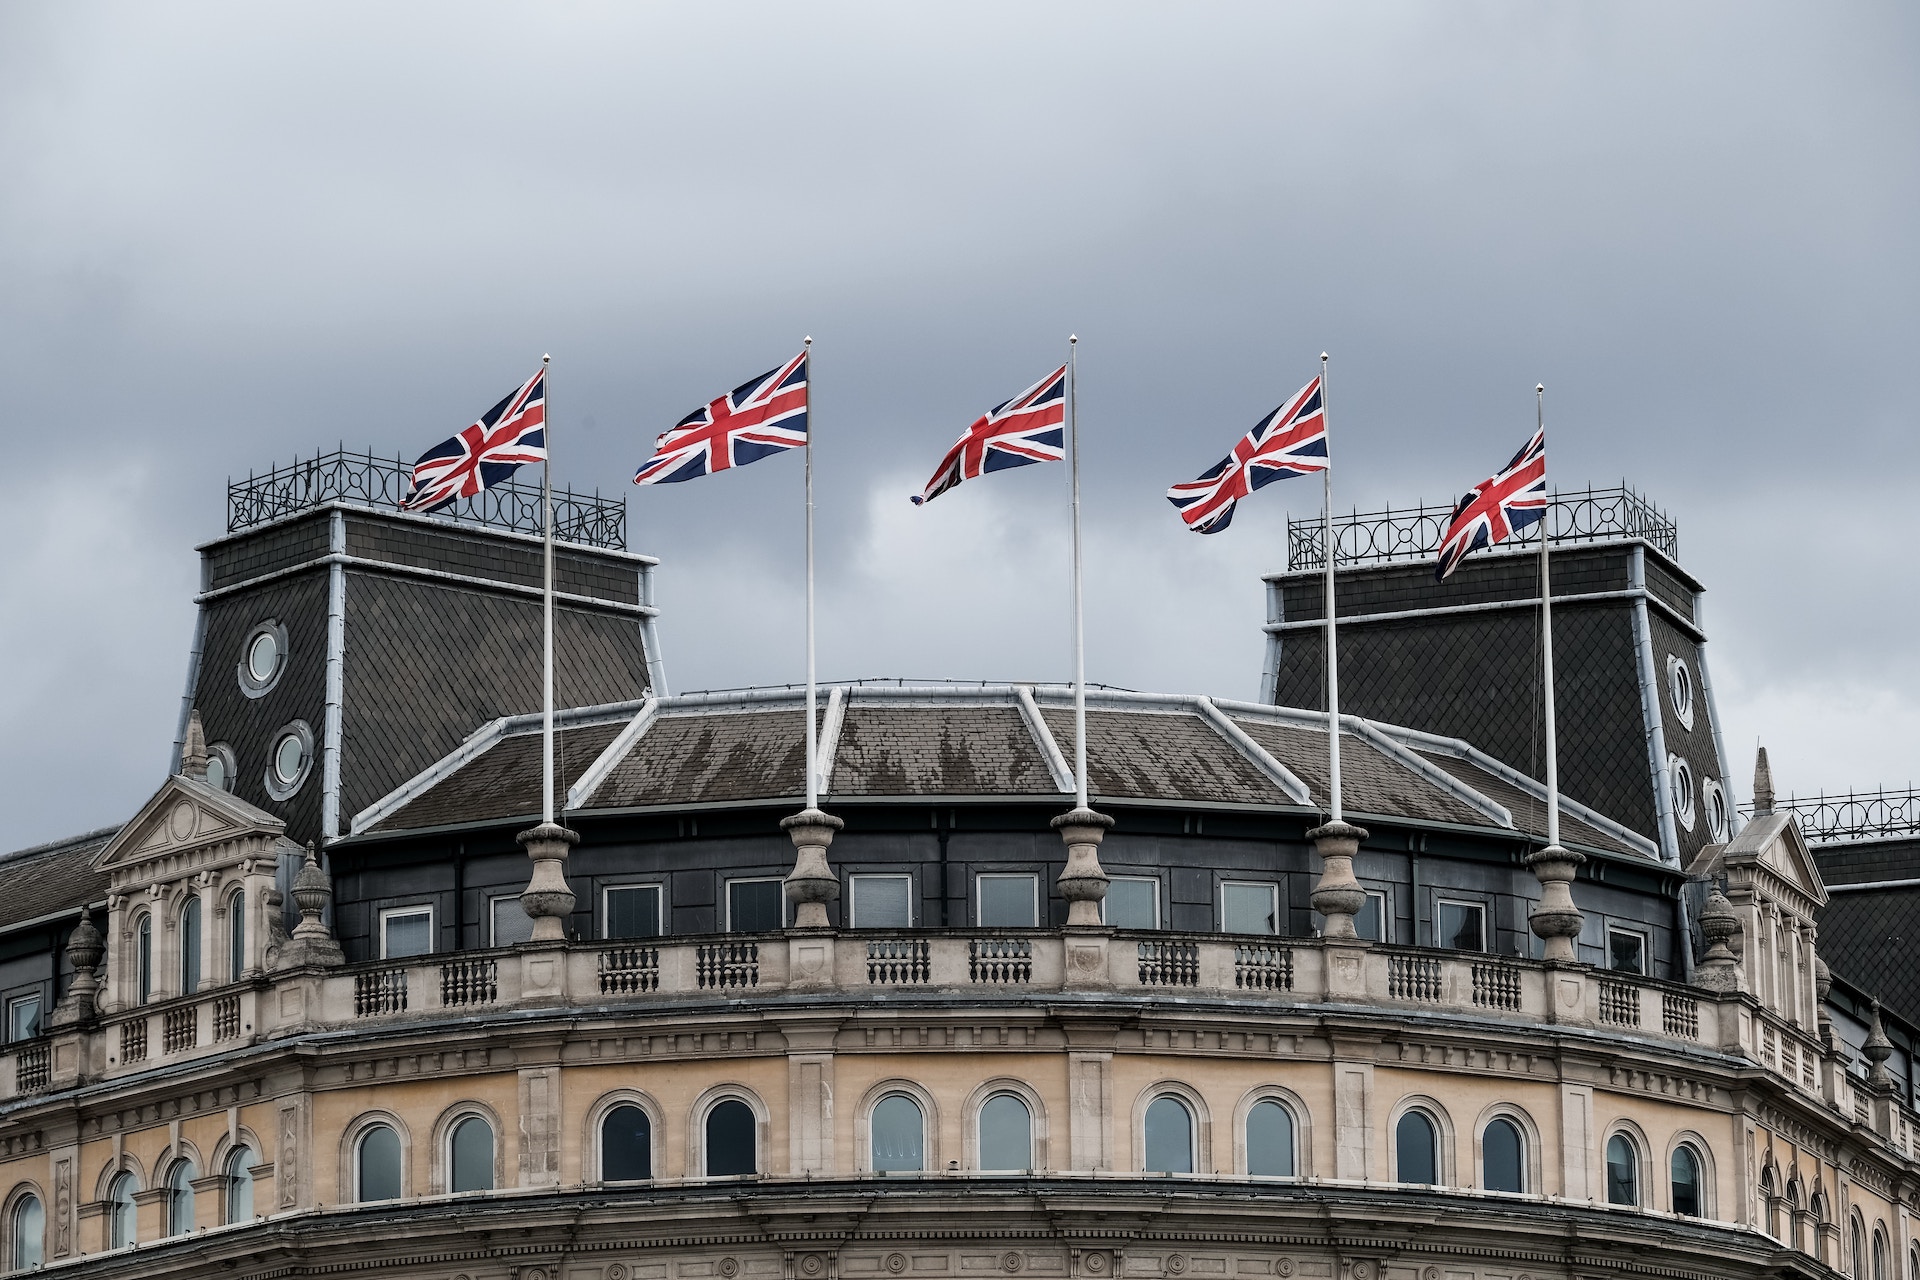 row of England flags on top of a building